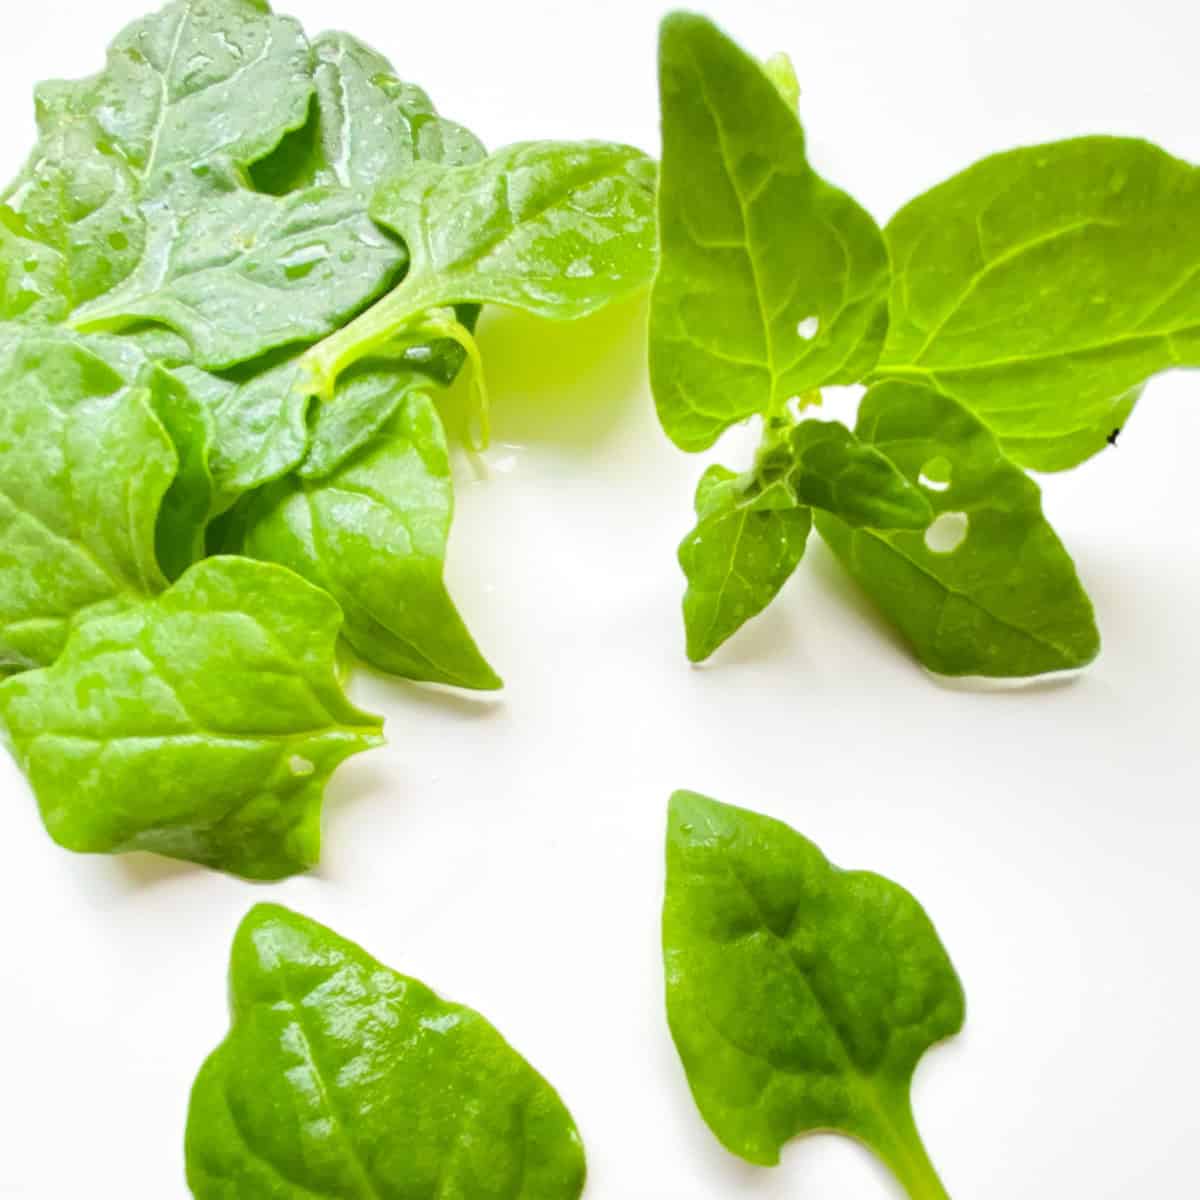 An image of new zealand spinach on a white countertop.